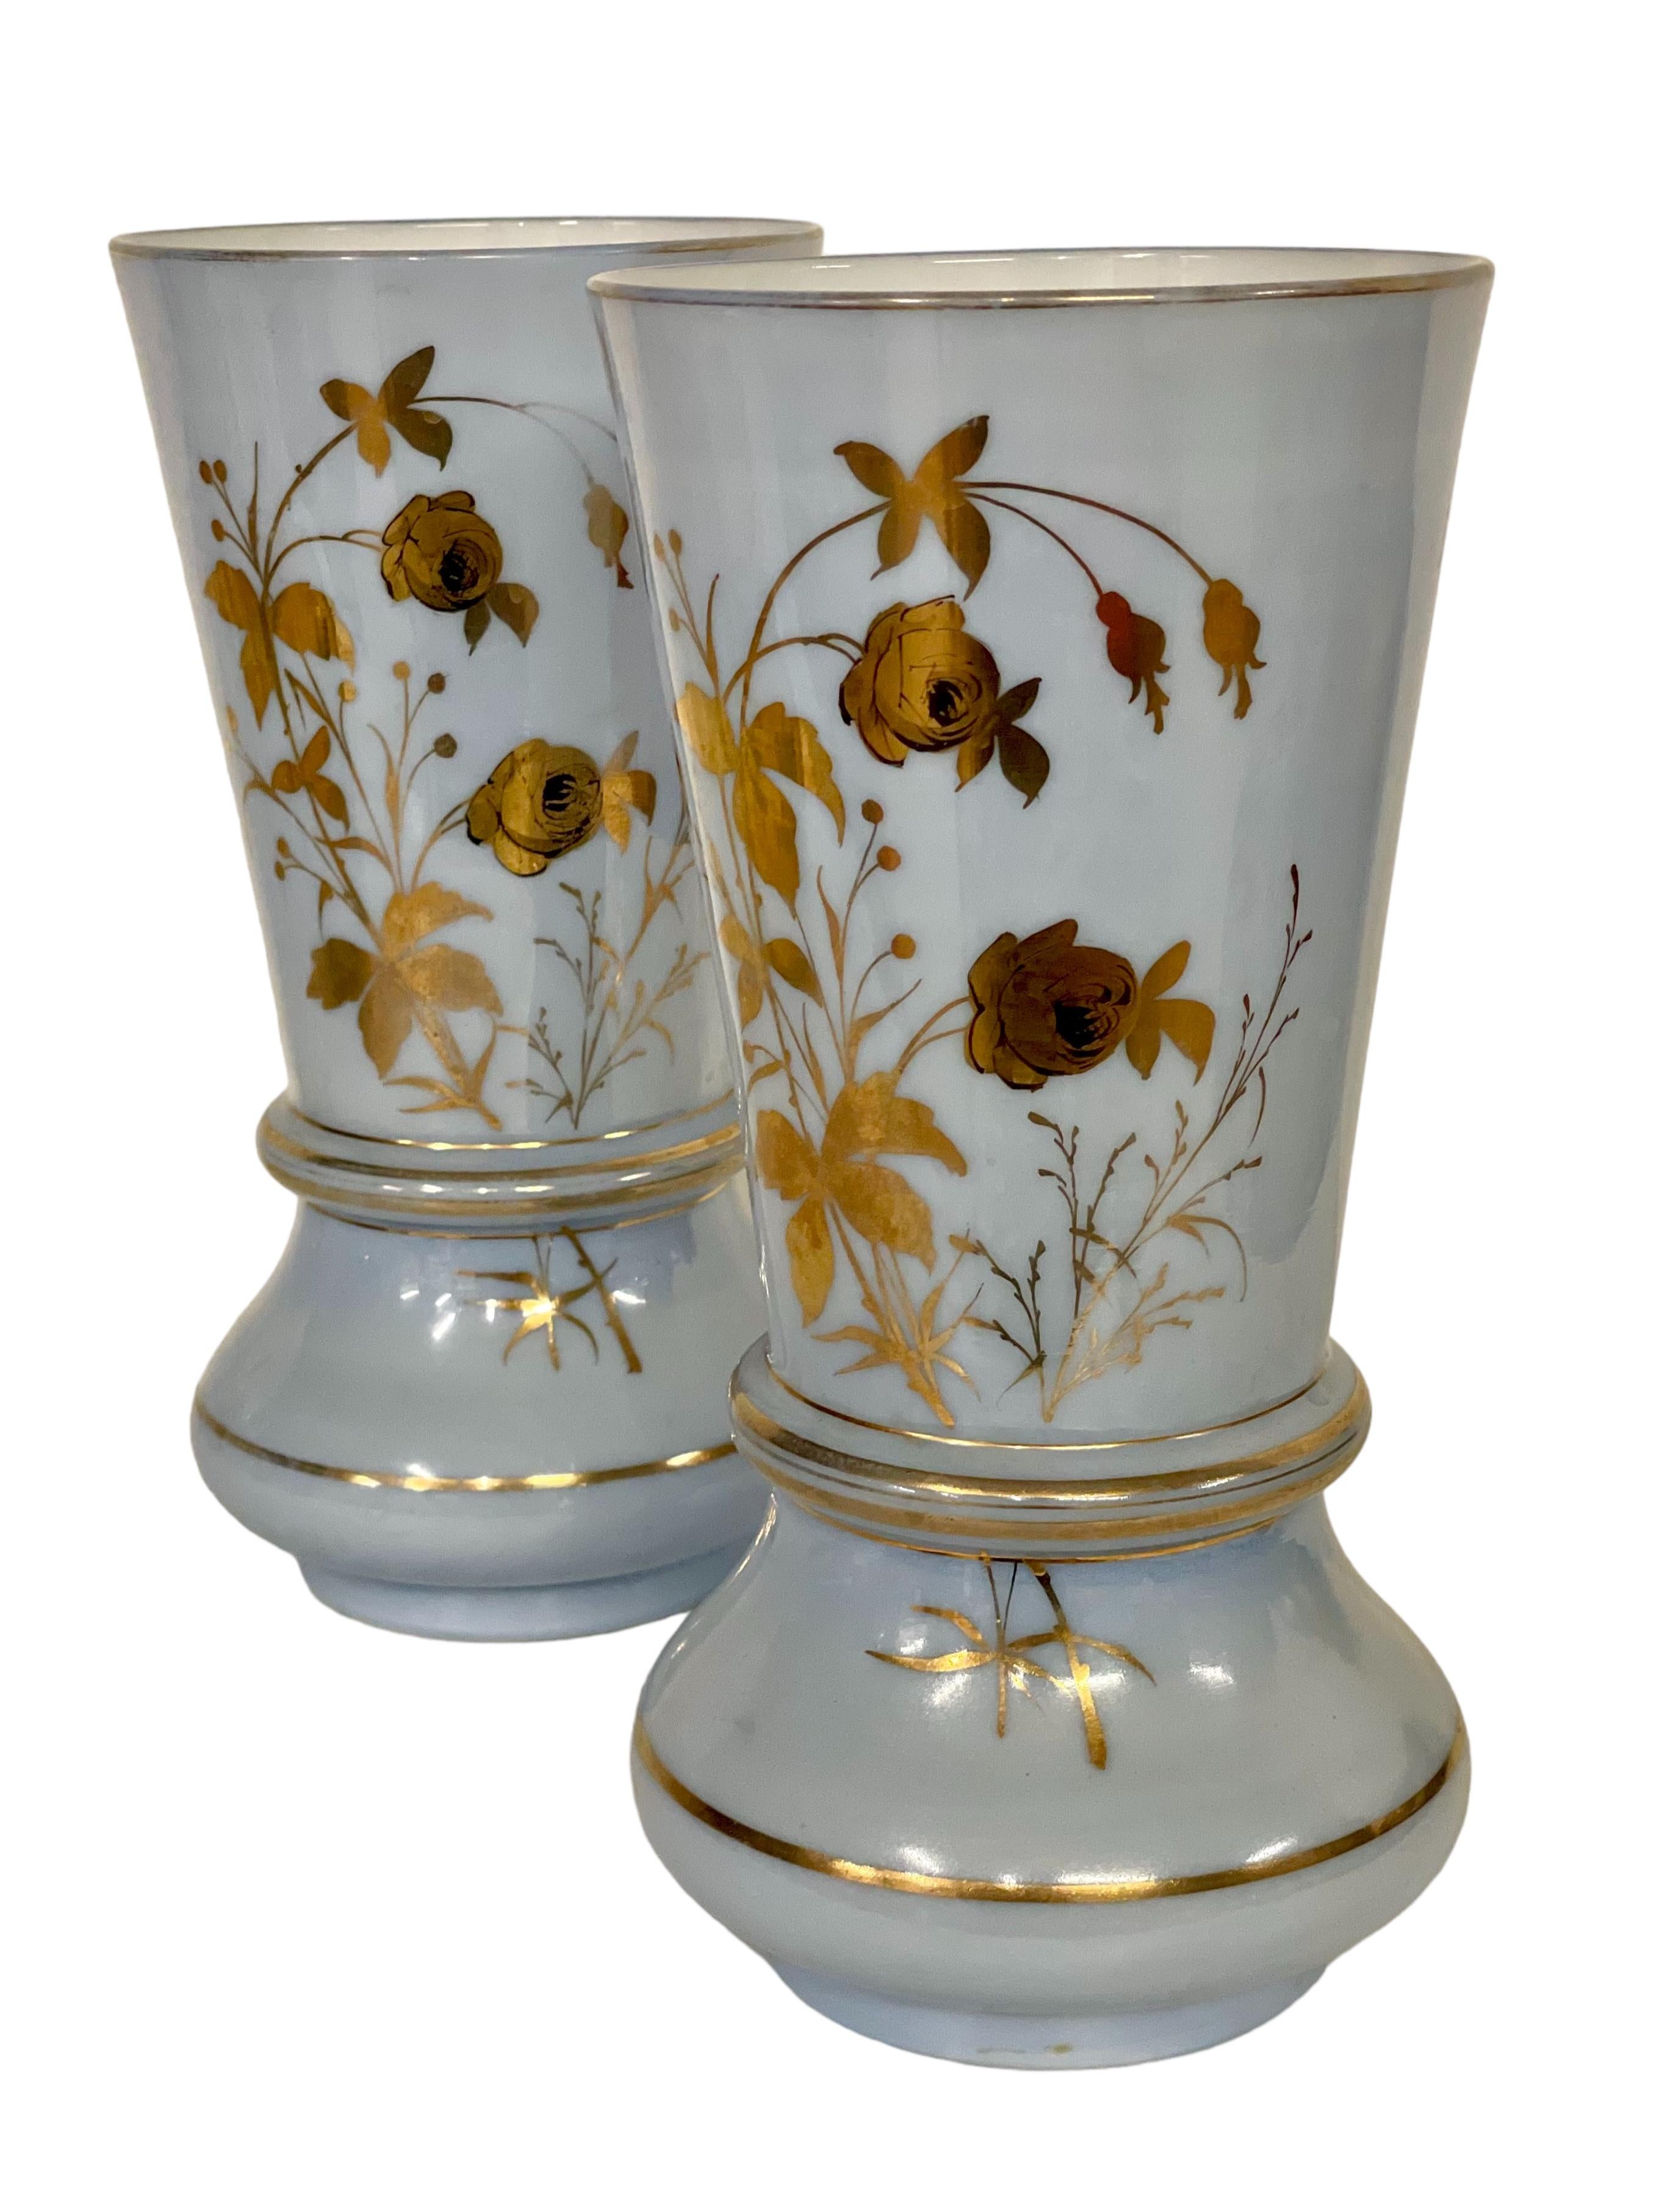 A very delicate pair of palest blue opaline glass vases dating from the mid-19th century (Napoleon III period), each skilfully hand blown and embellished with gilt. These vases have flared bases and rims that have been highlighted with golden bands